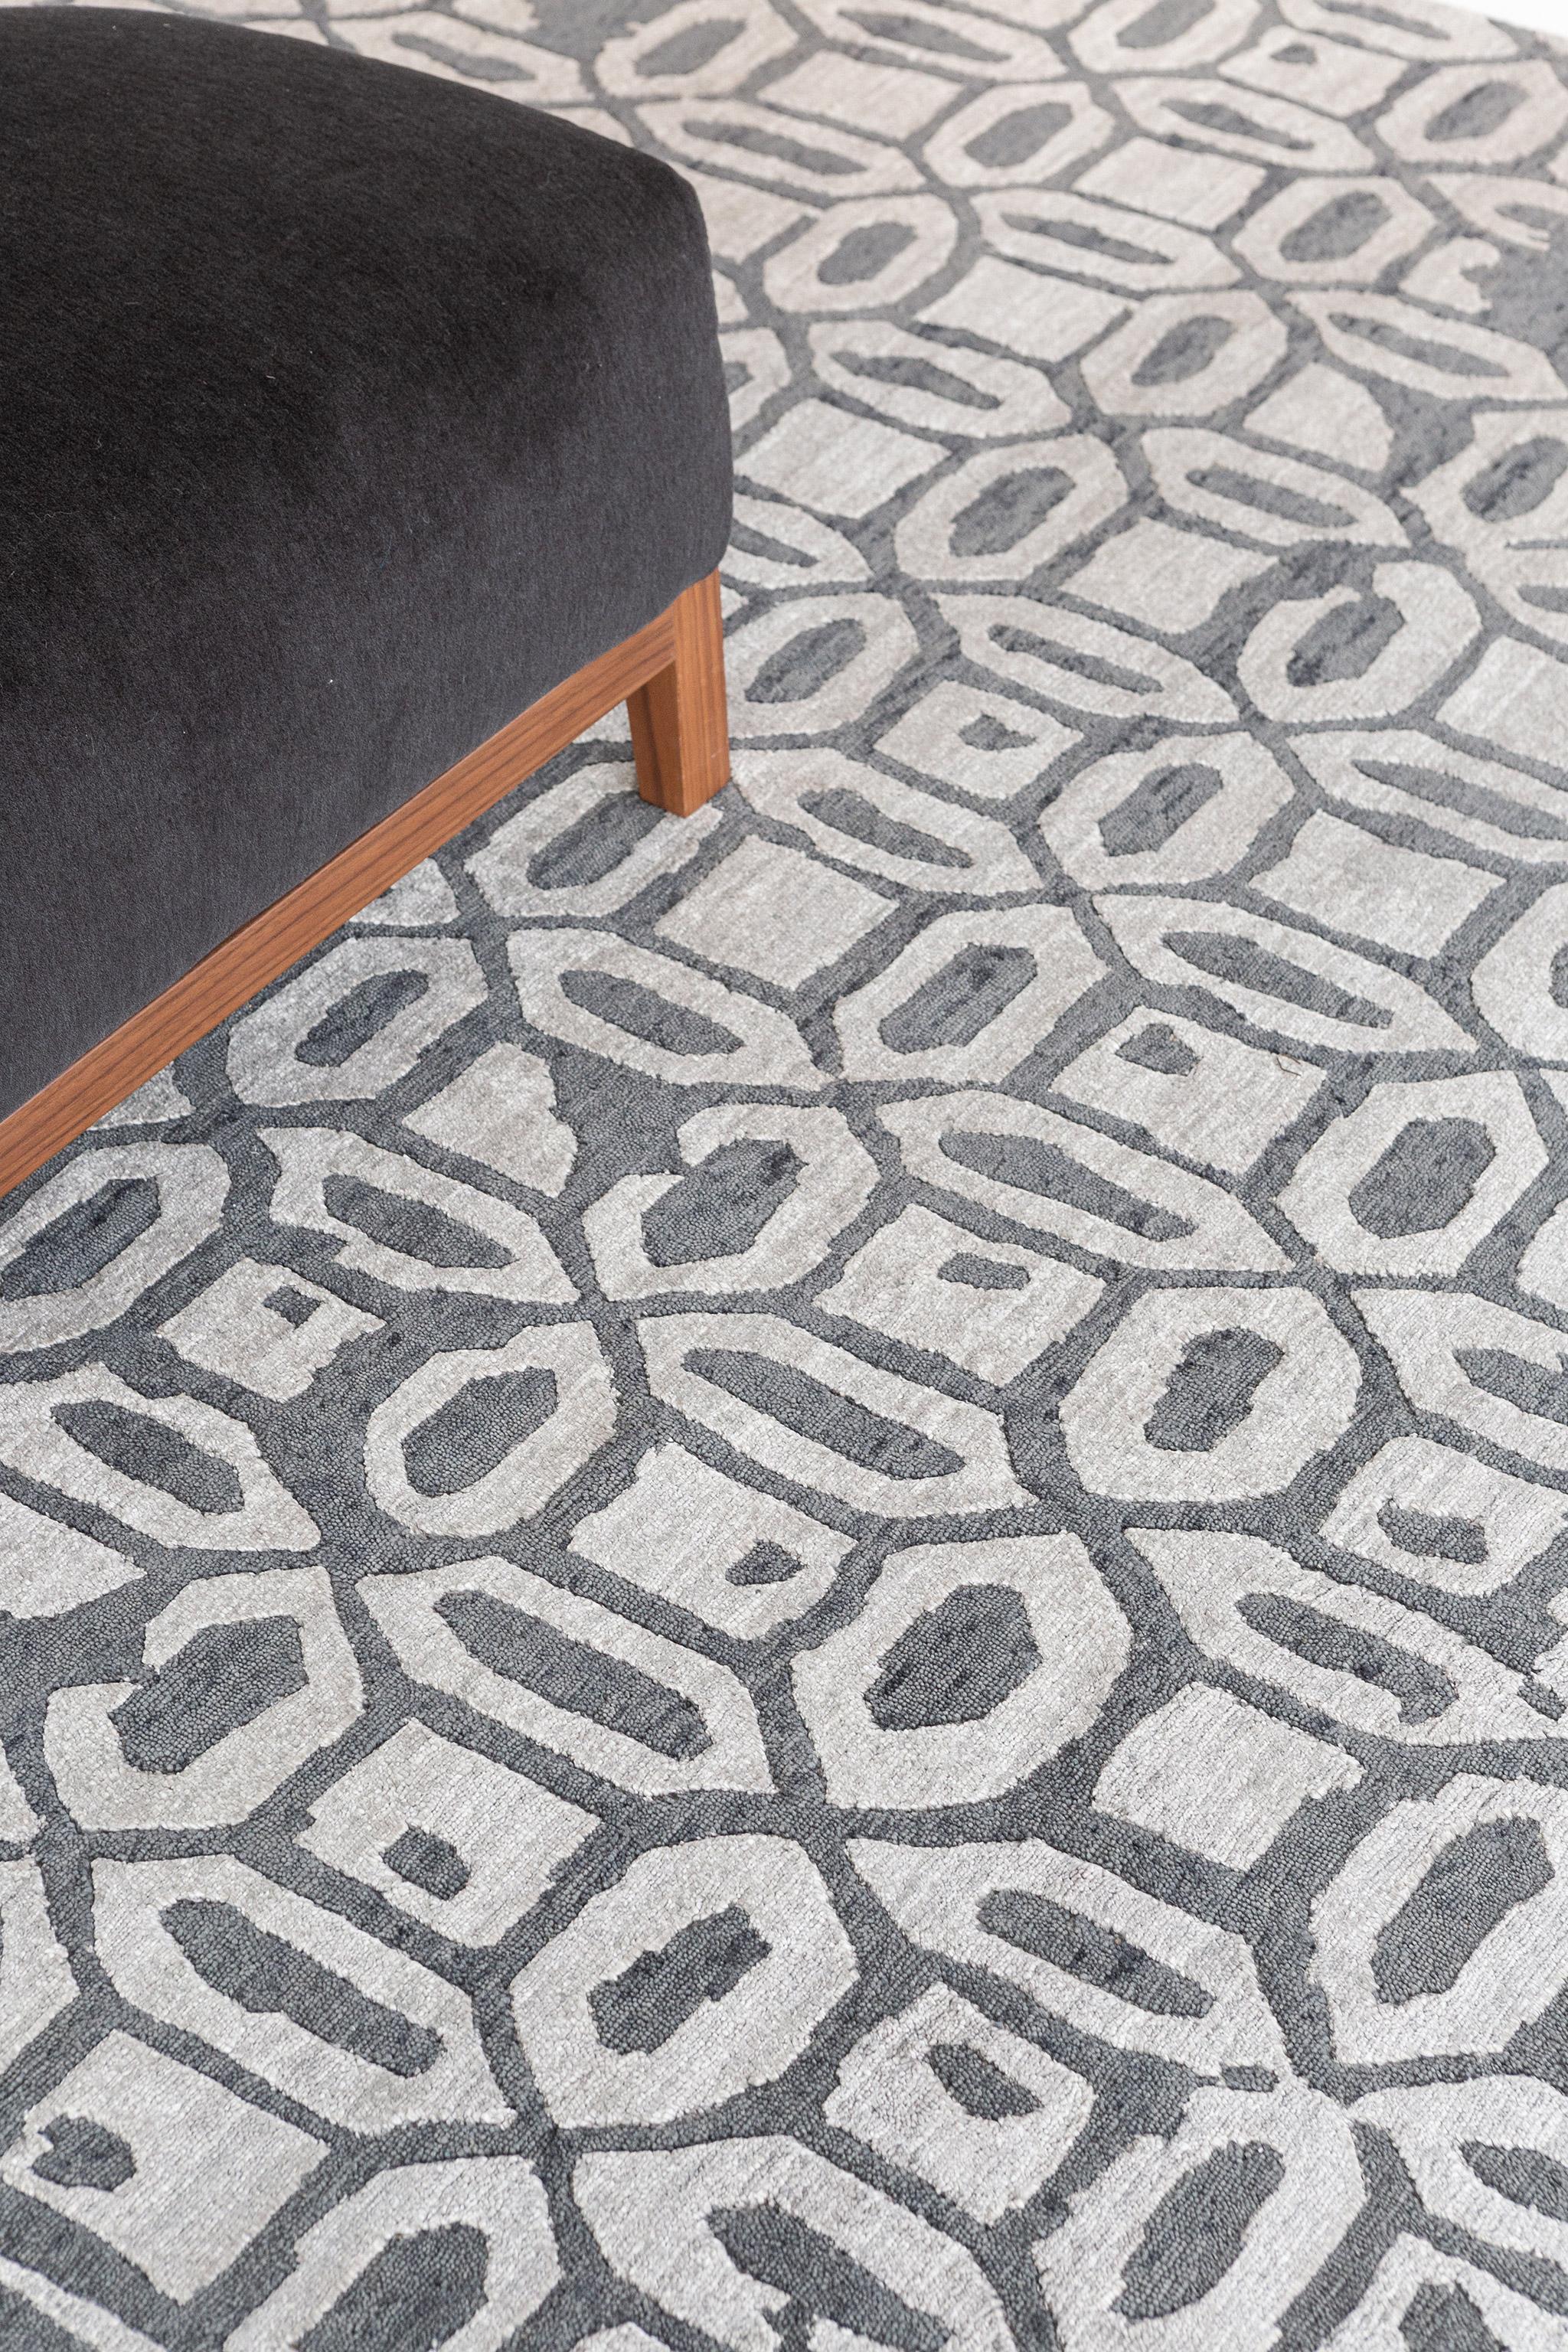 This classic Rallegra Modern Design Bamboo Silk rug features a geometric pattern, with its playful combination of charcoal and gray powerful colors. It is just as trendy and refined at the same time, perfect for any connoisseur of a fine